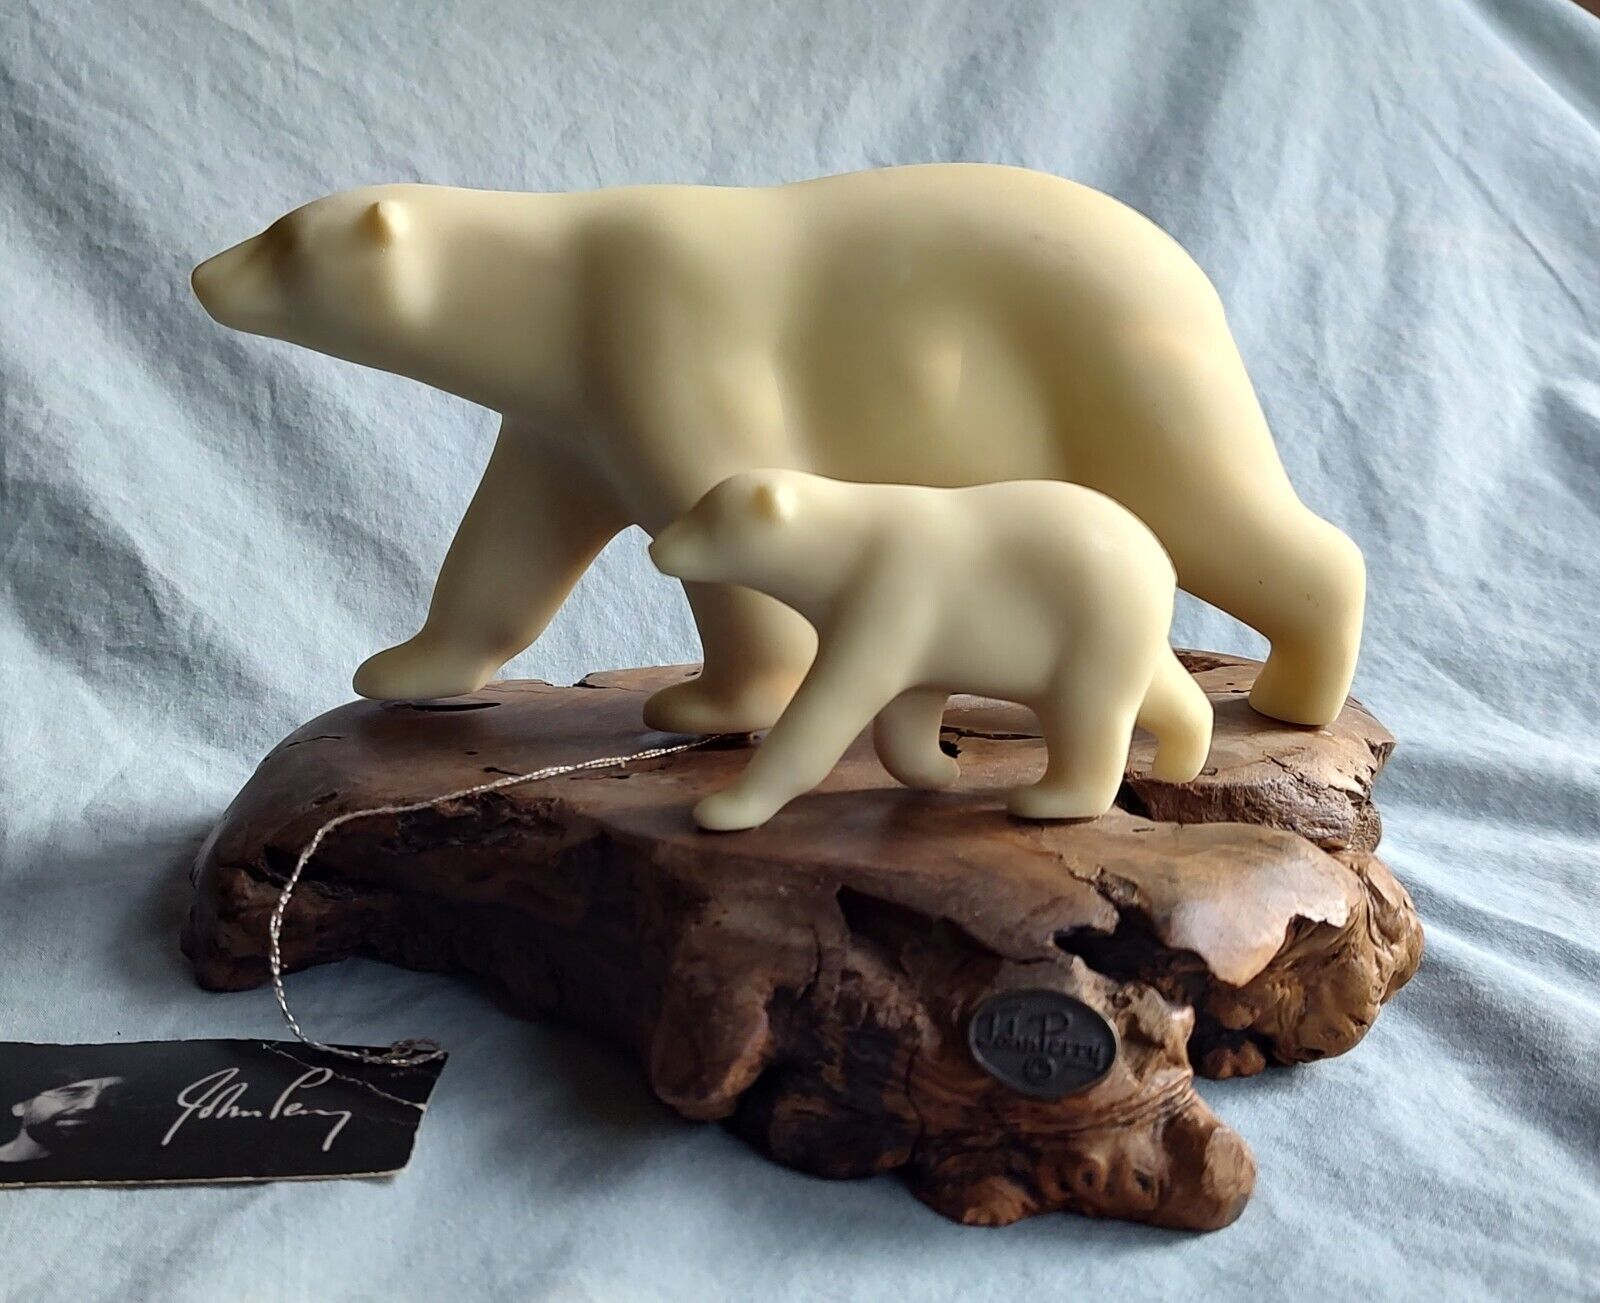 Polar Bear Walking With Baby Cub On Burl Wood Base Sculpture By John Perry